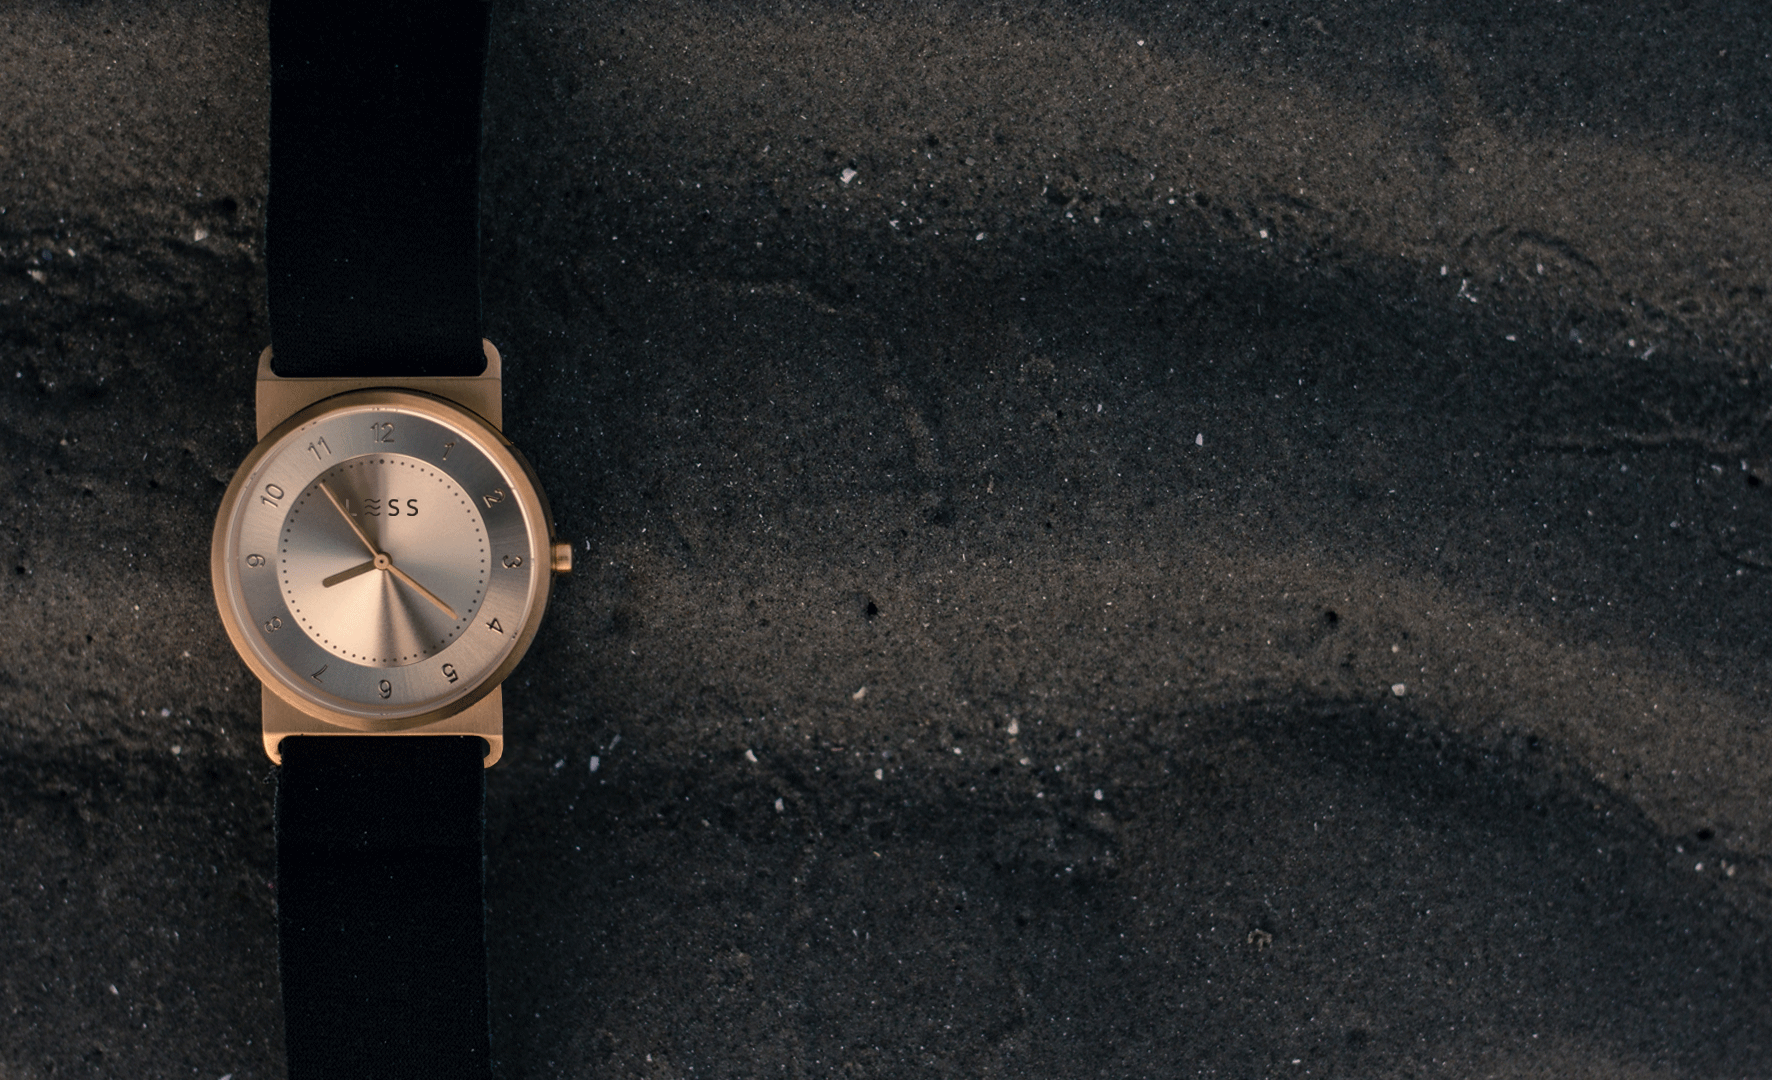 gold watch minimalist design upcycled wetsuit strap on beach